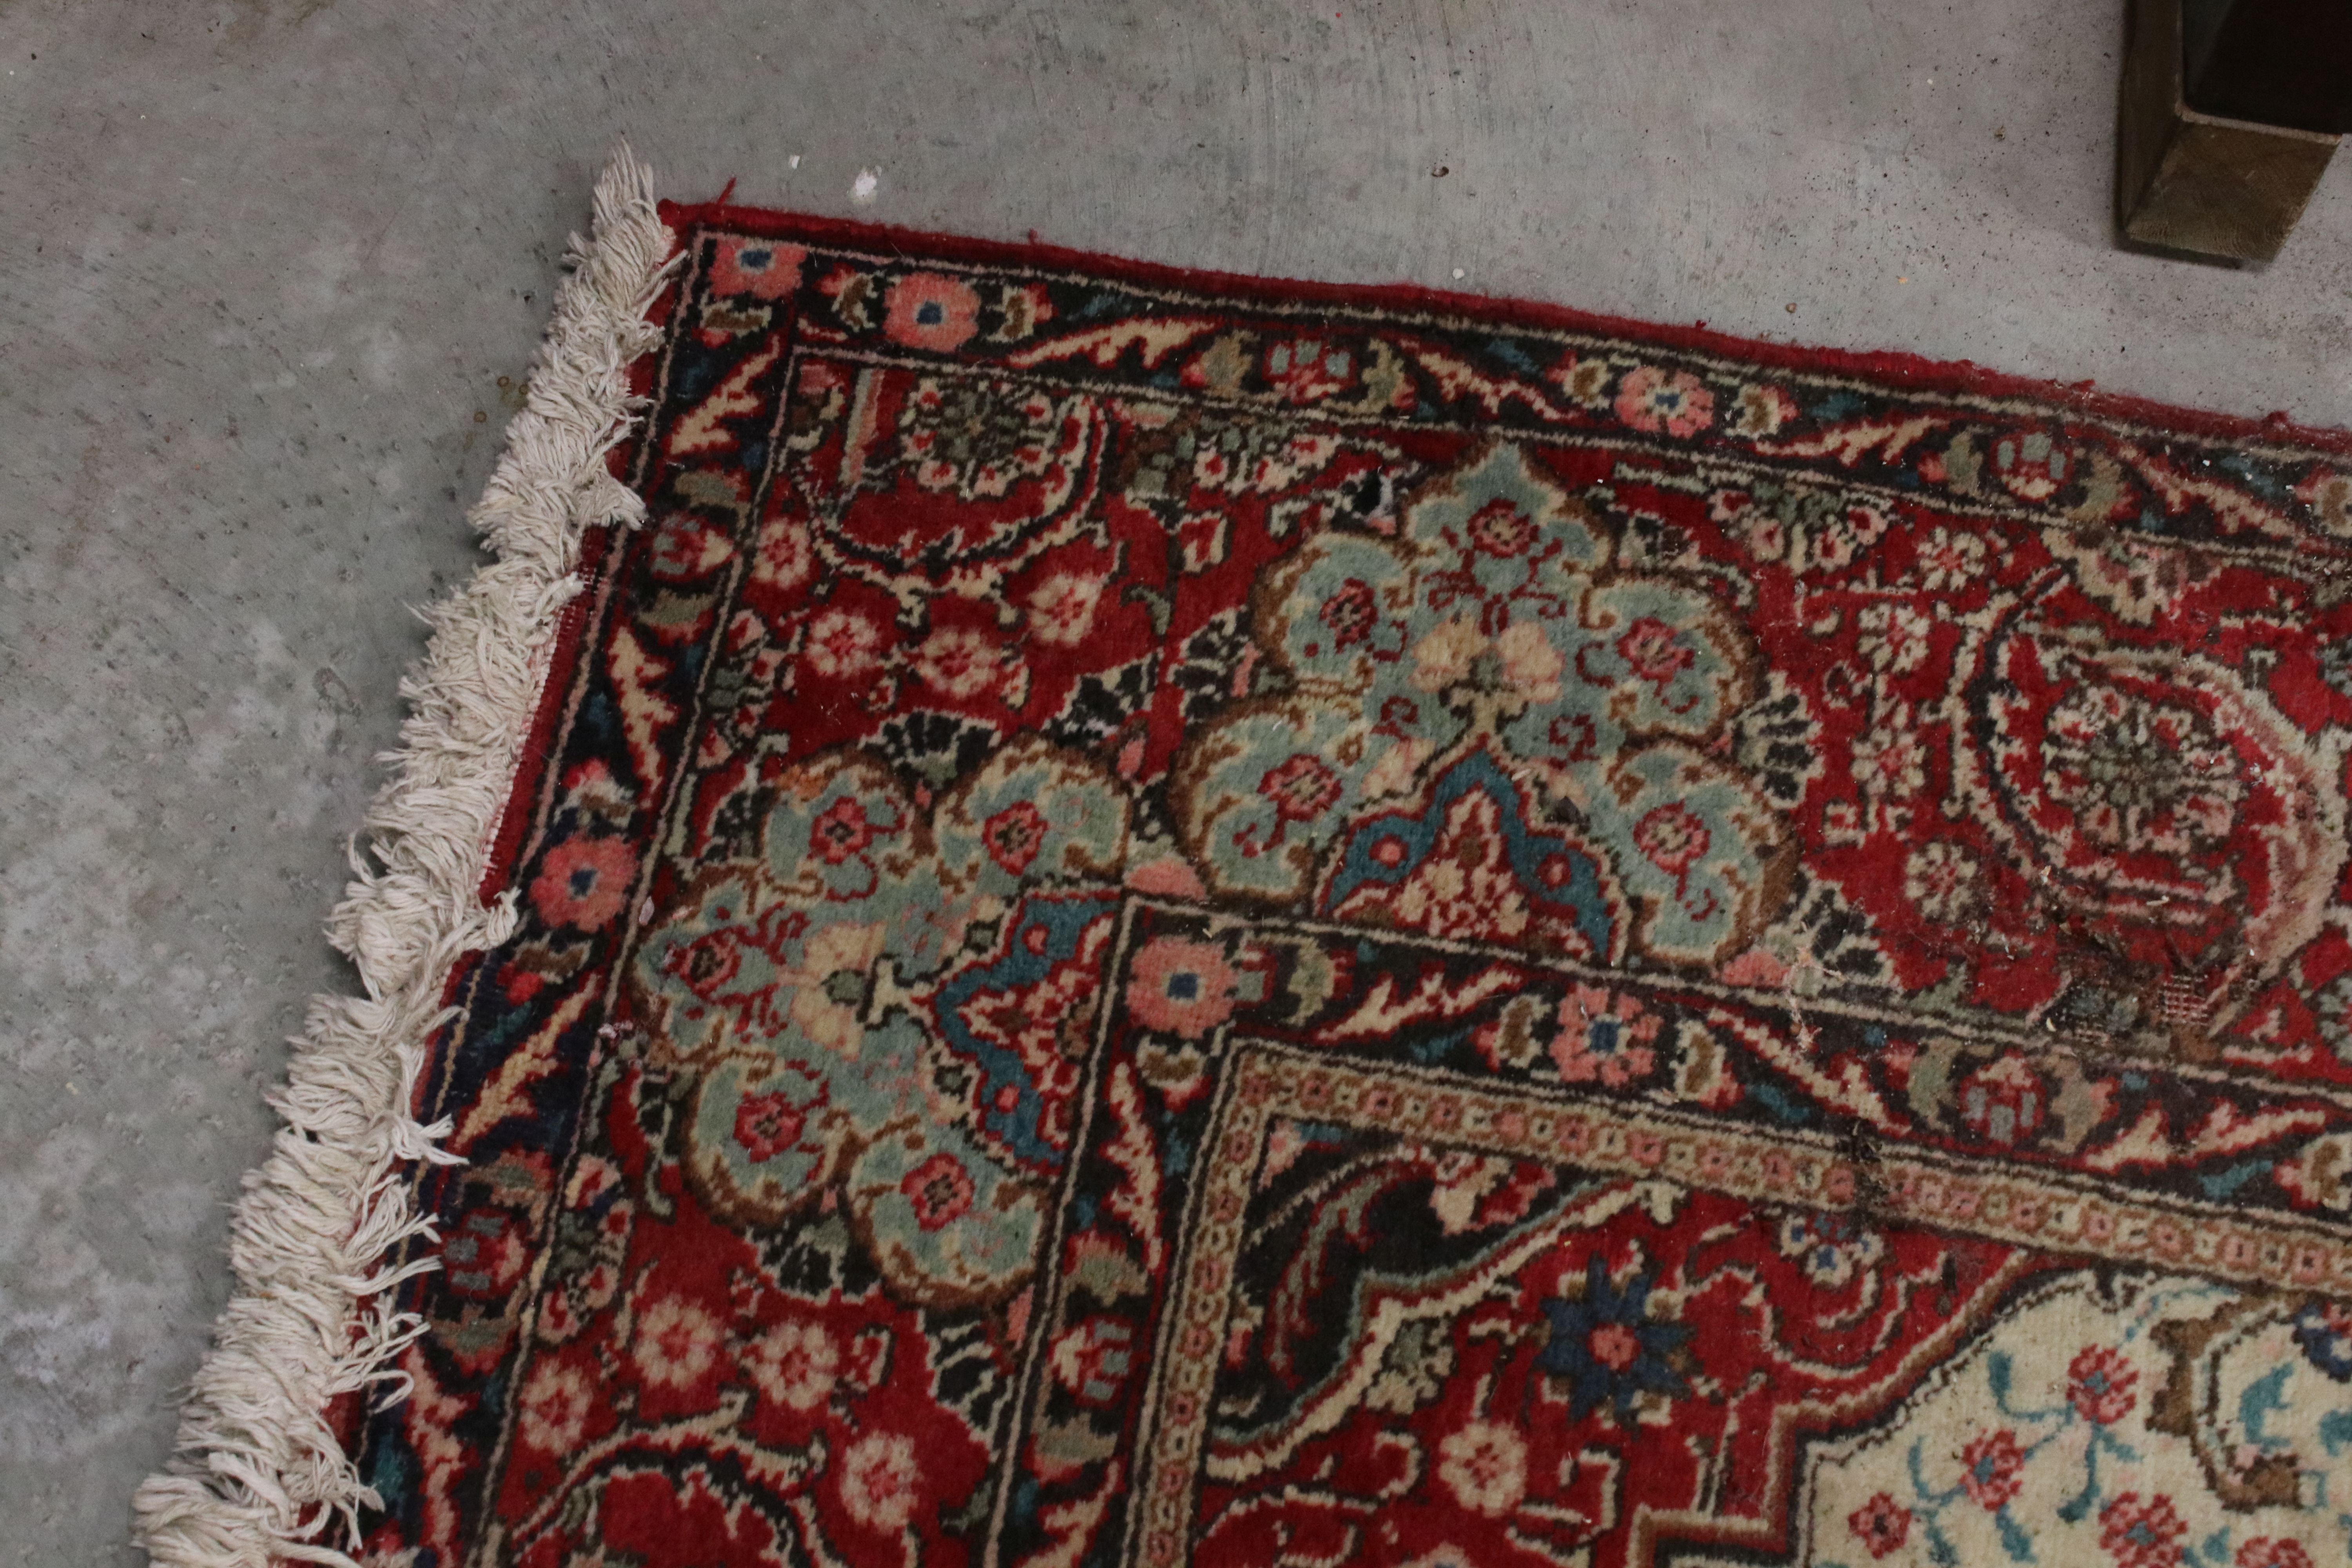 Large Wool Red Ground Rug with floral pattern within a border, 279cms x 396cms - Image 7 of 10